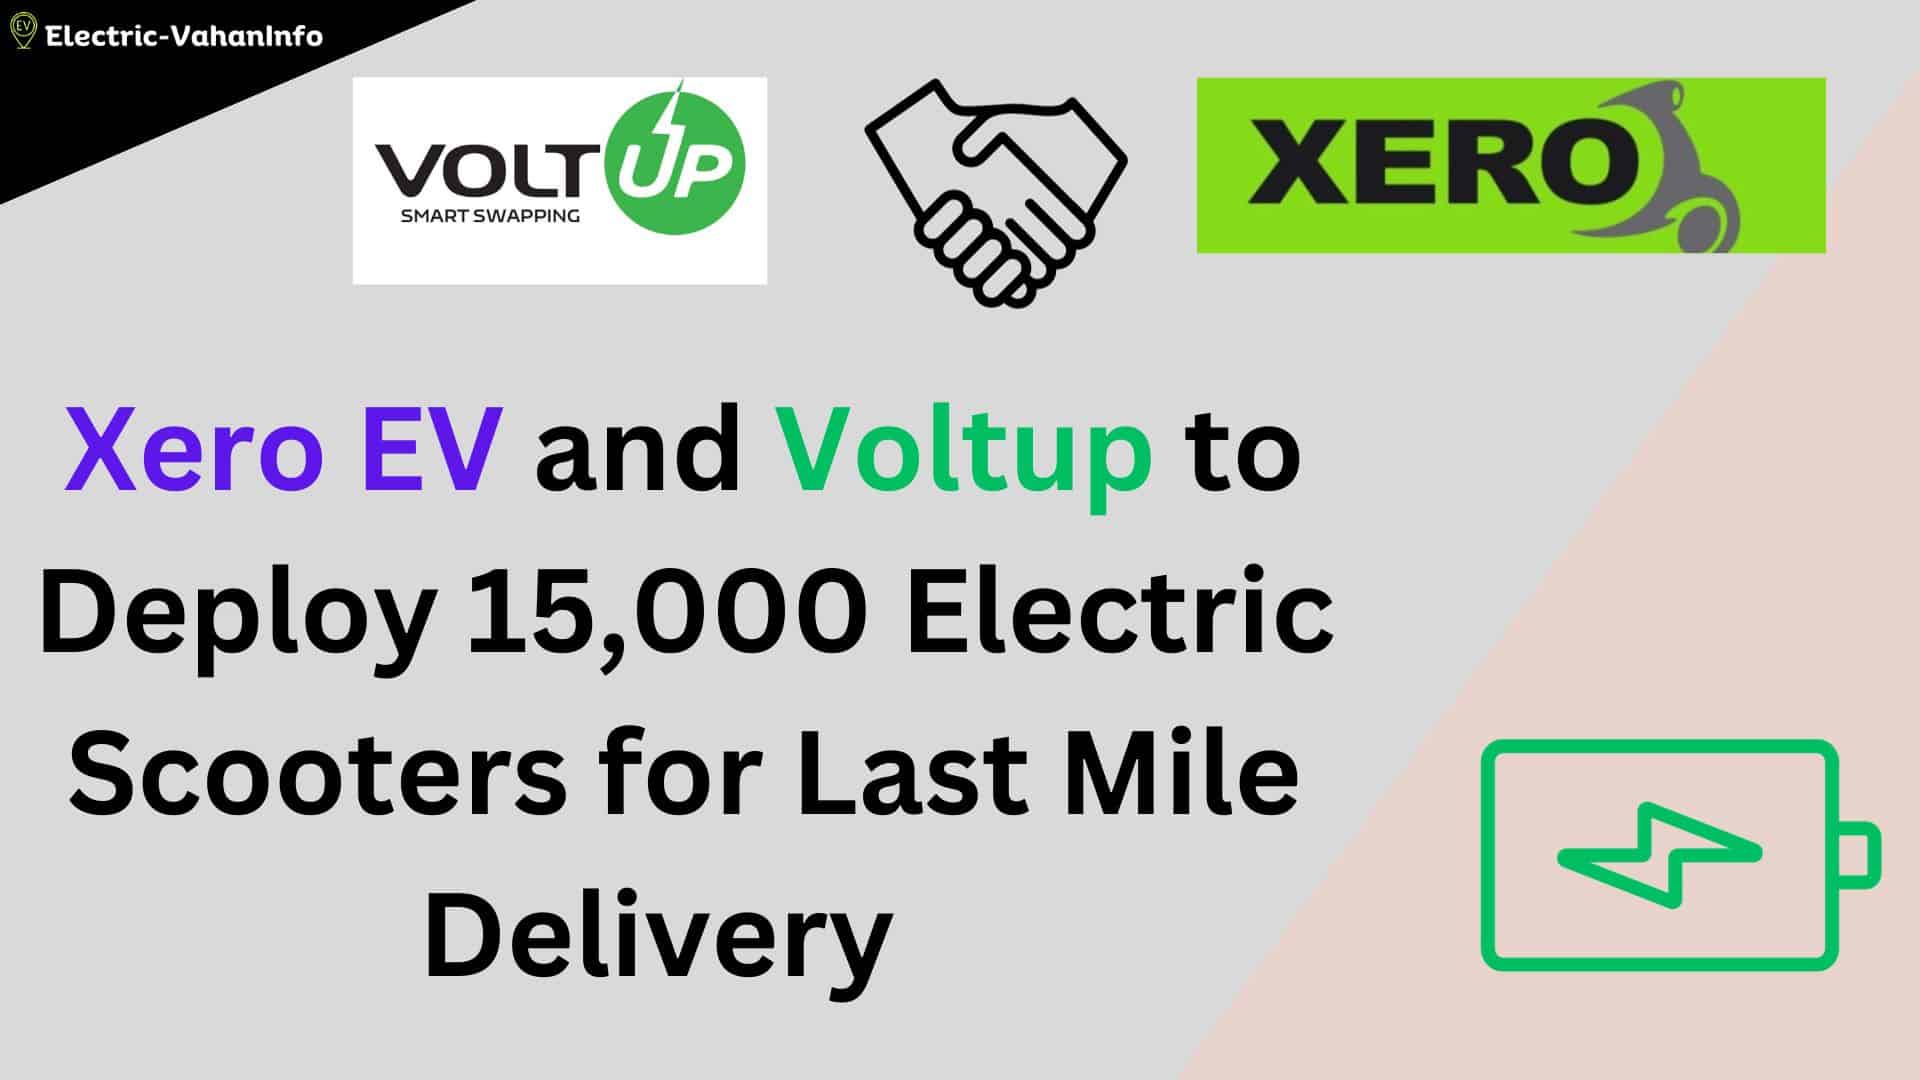 https://electric-vahaninfo.com/xero-ev-and-voltup-to-deploy-15000-electric-scooters-for-last-mile-delivery/